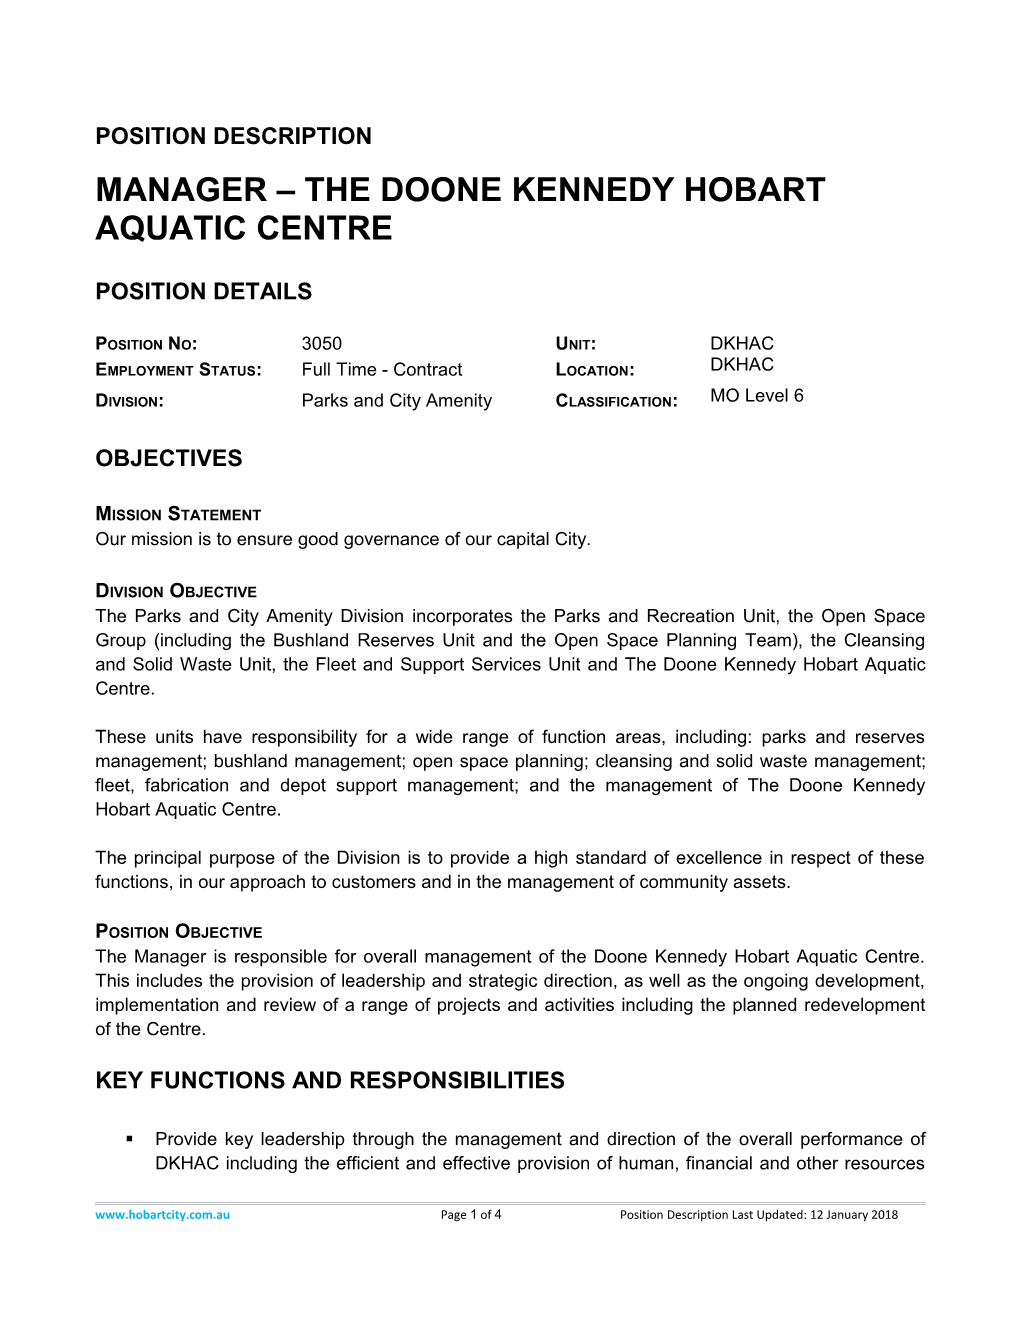 Manager the Doone Kennedy Hobart Aquatic Centre